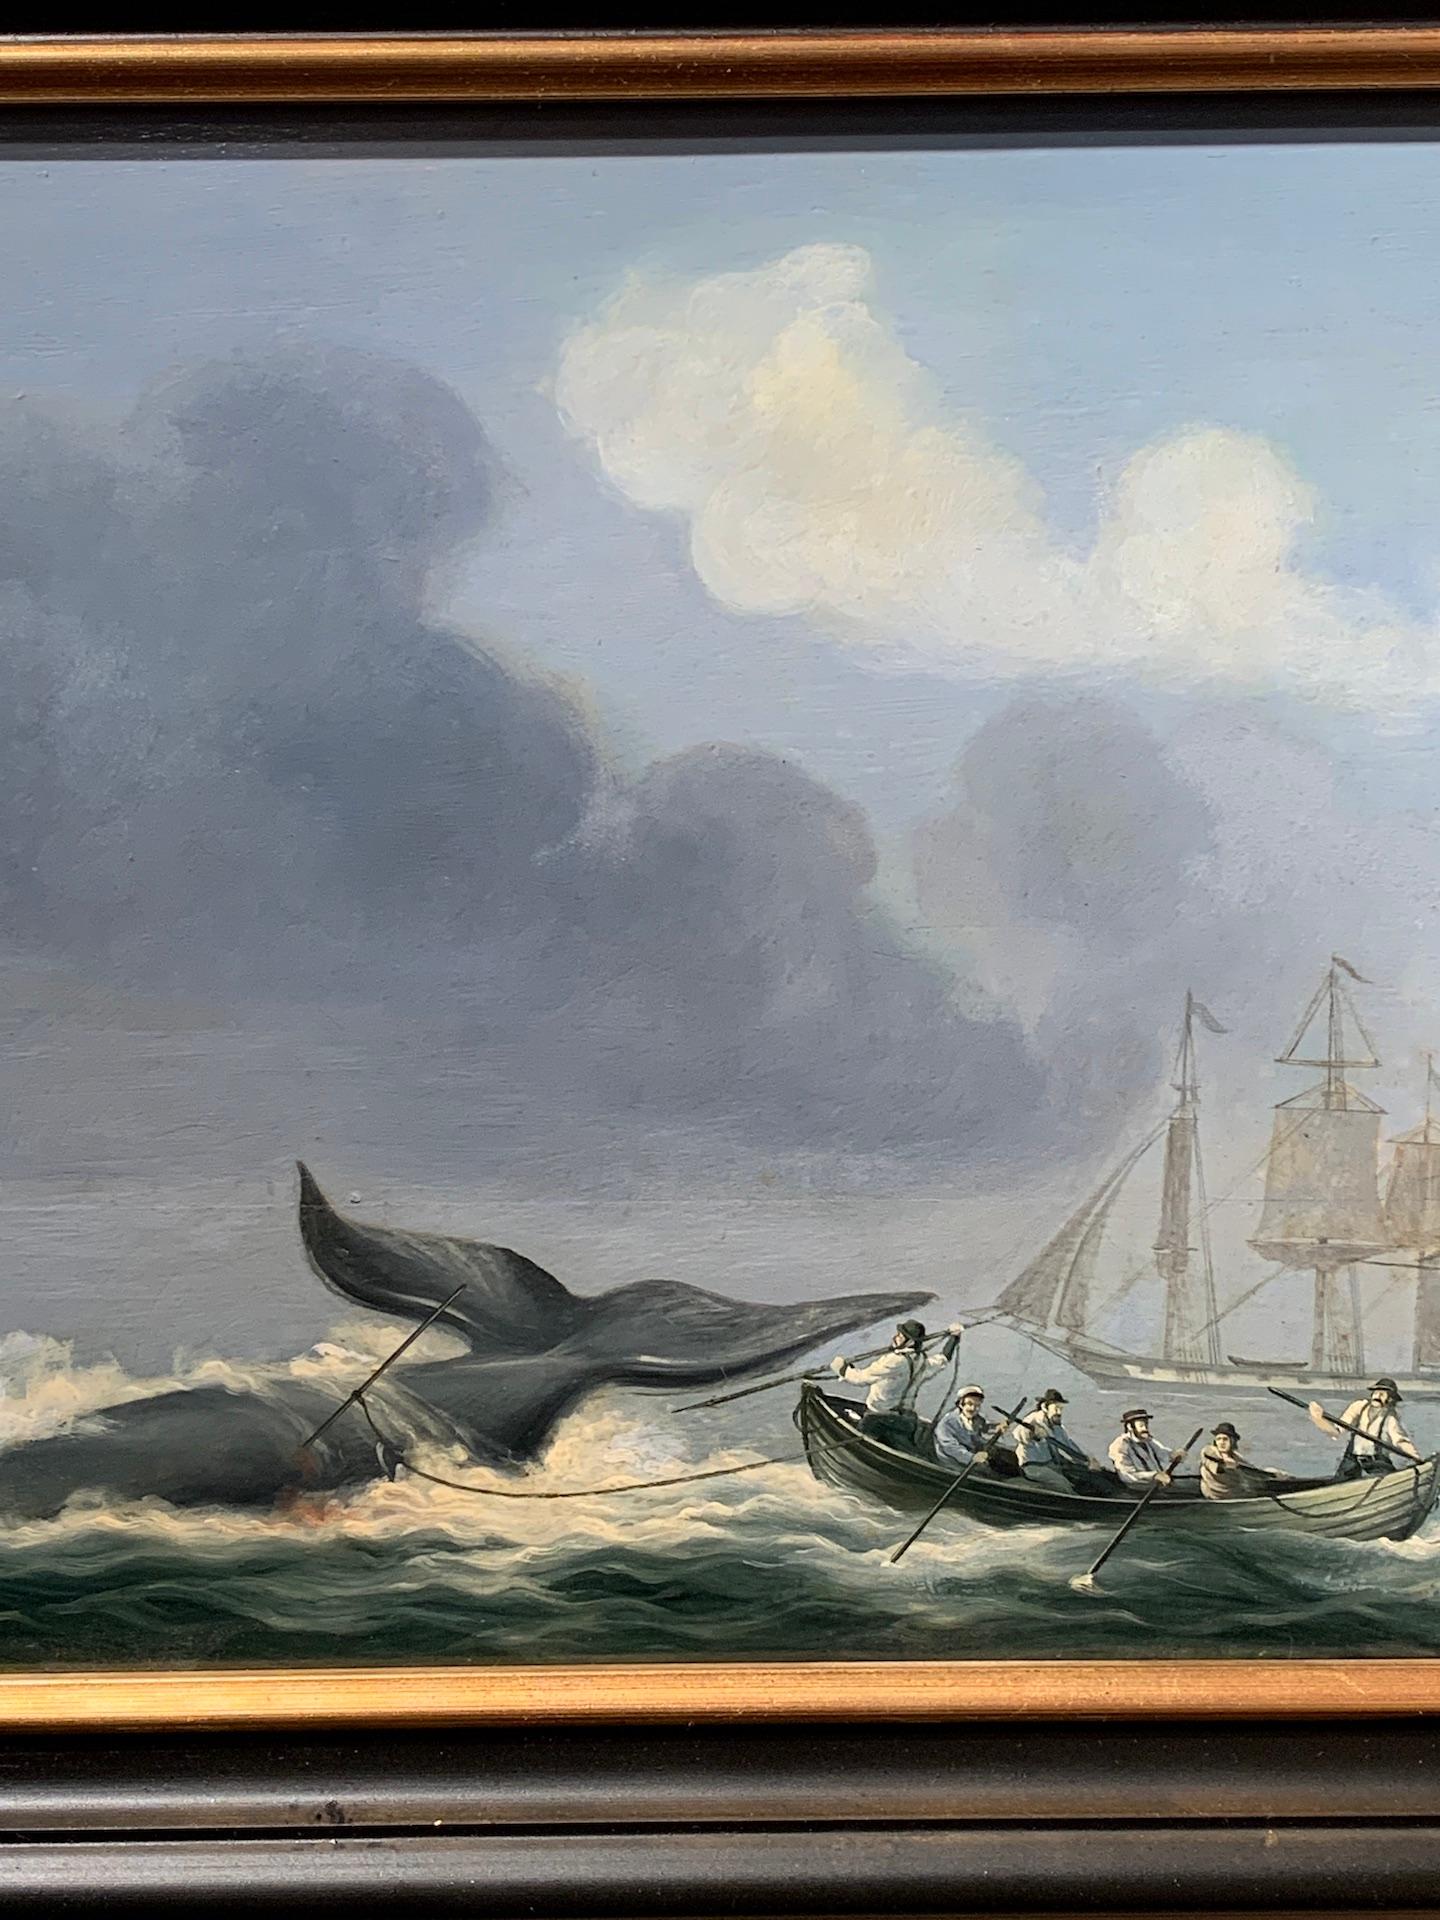 19th century North East American whaling boats at sea with Whale attack - Painting by 19th century American School